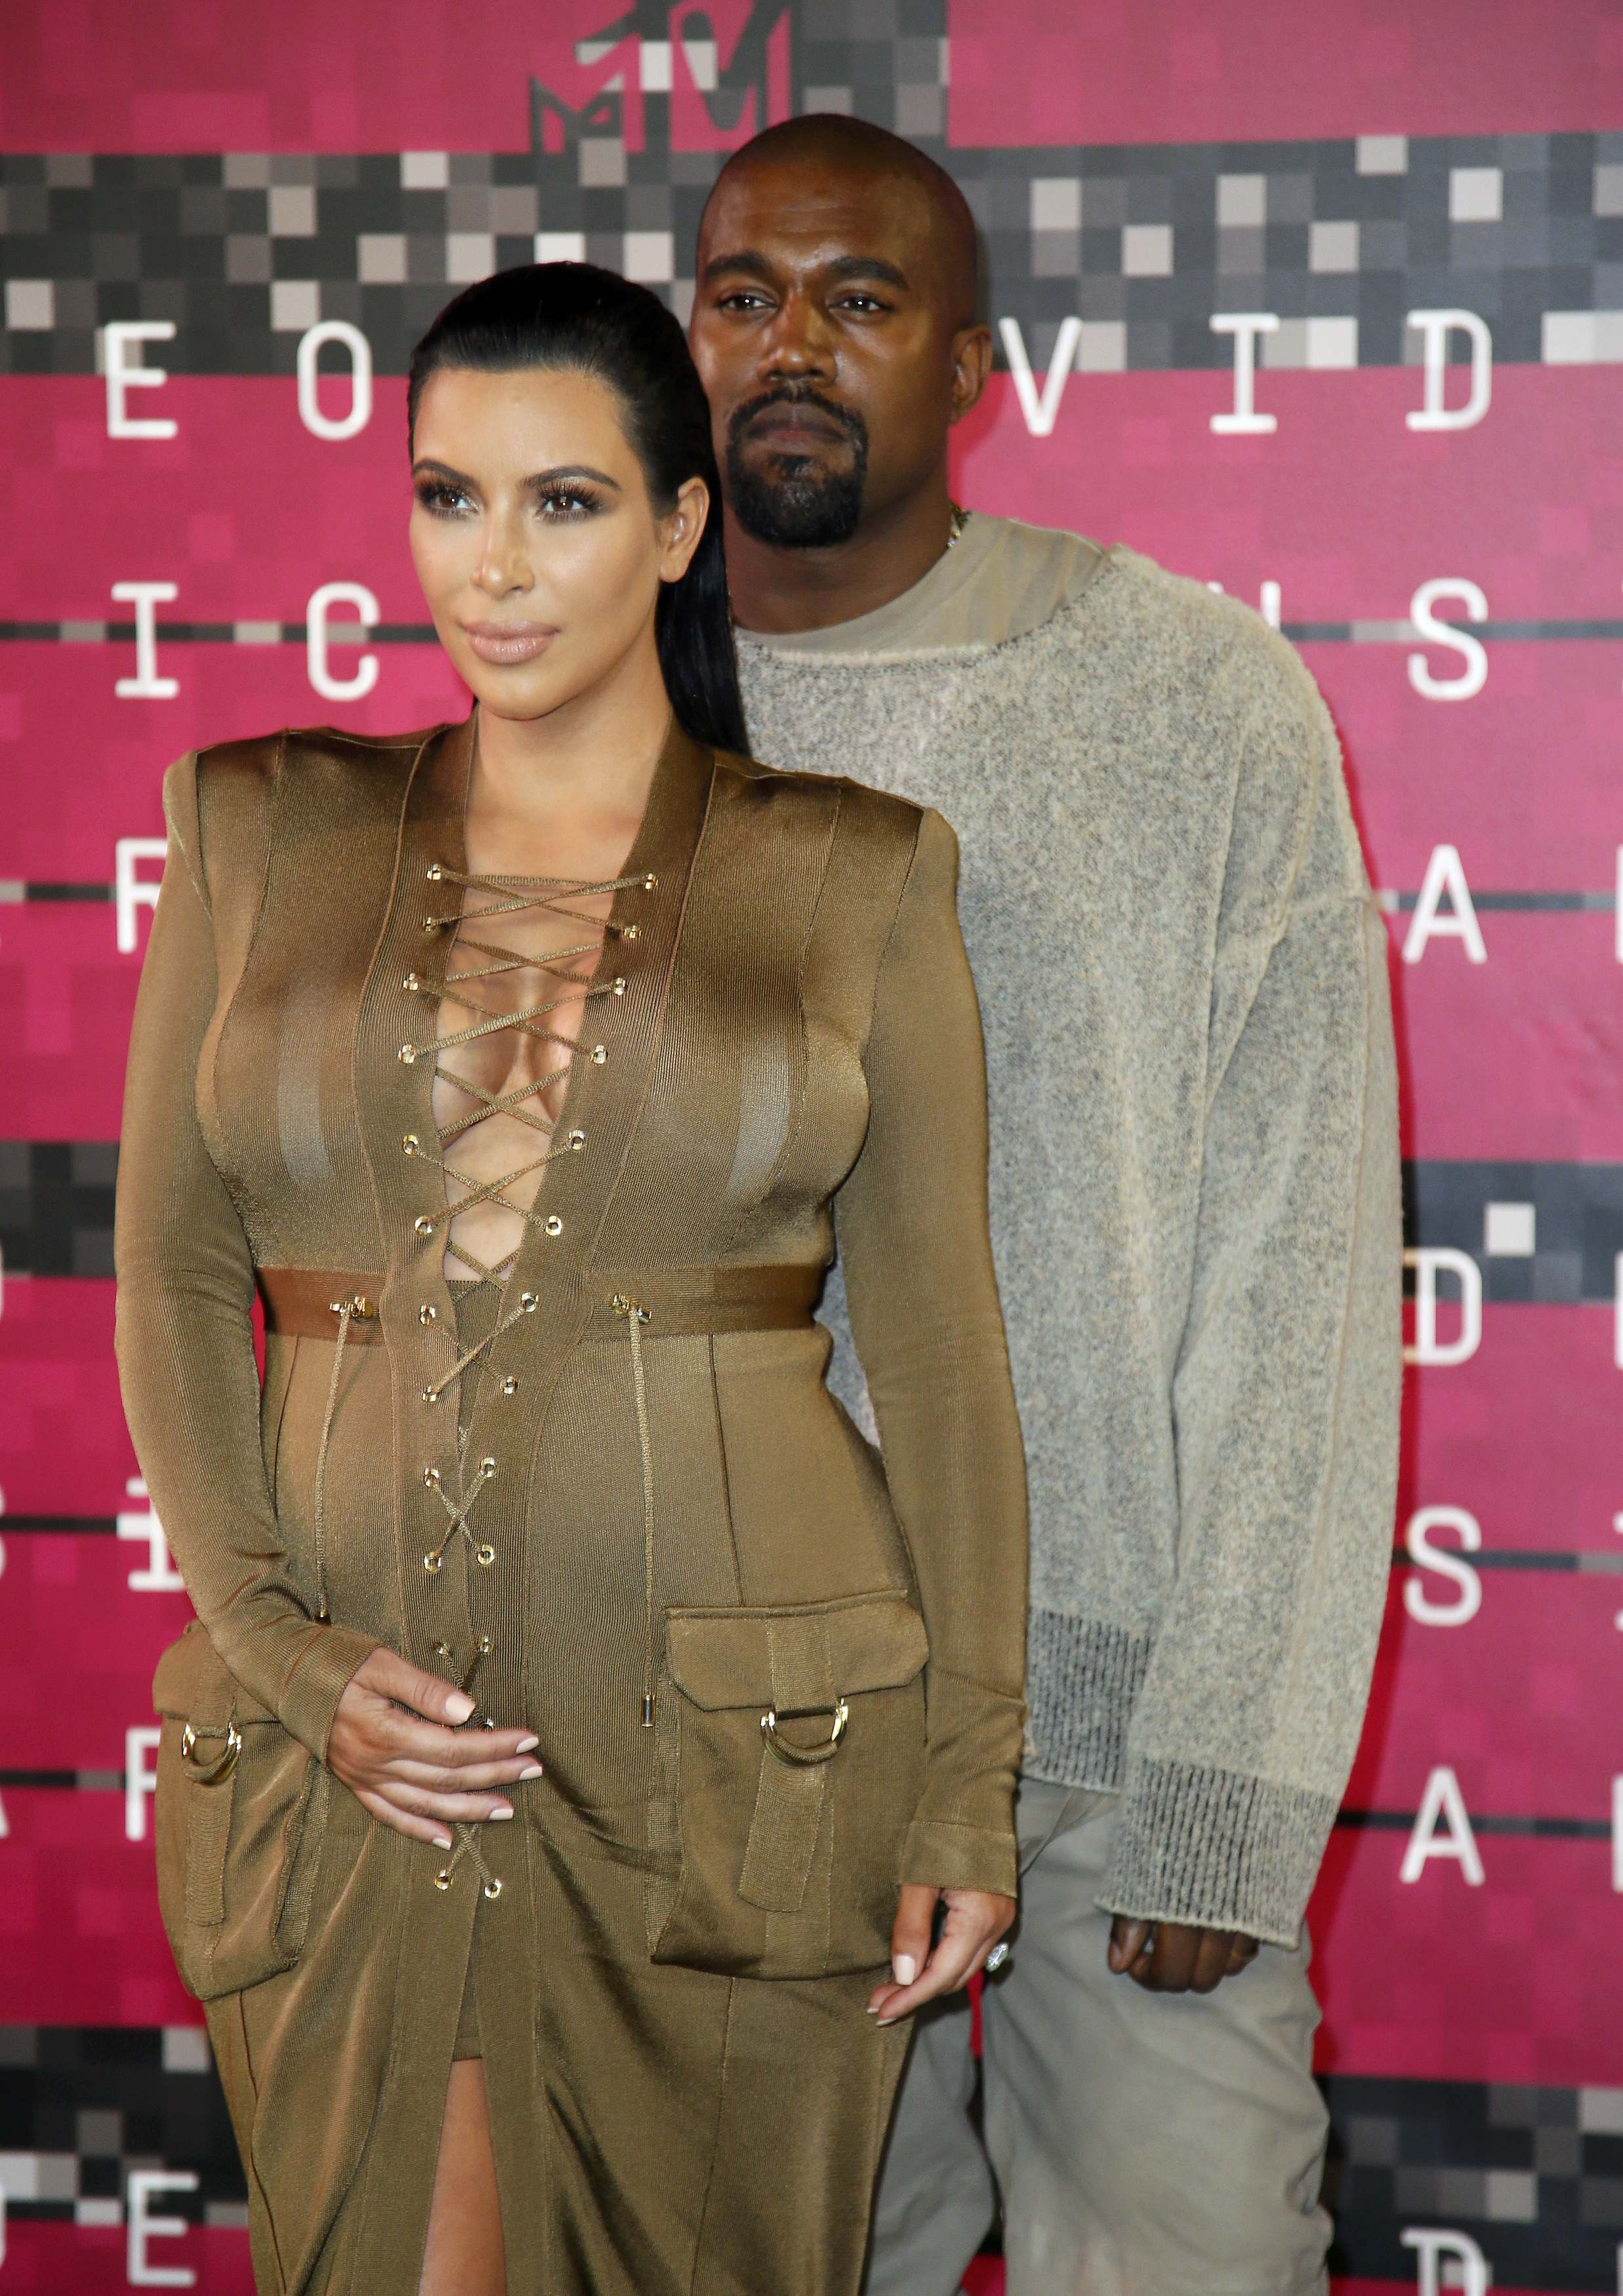 Kim and Kanye West posed together at the MTV Video Music Awards in August 2015